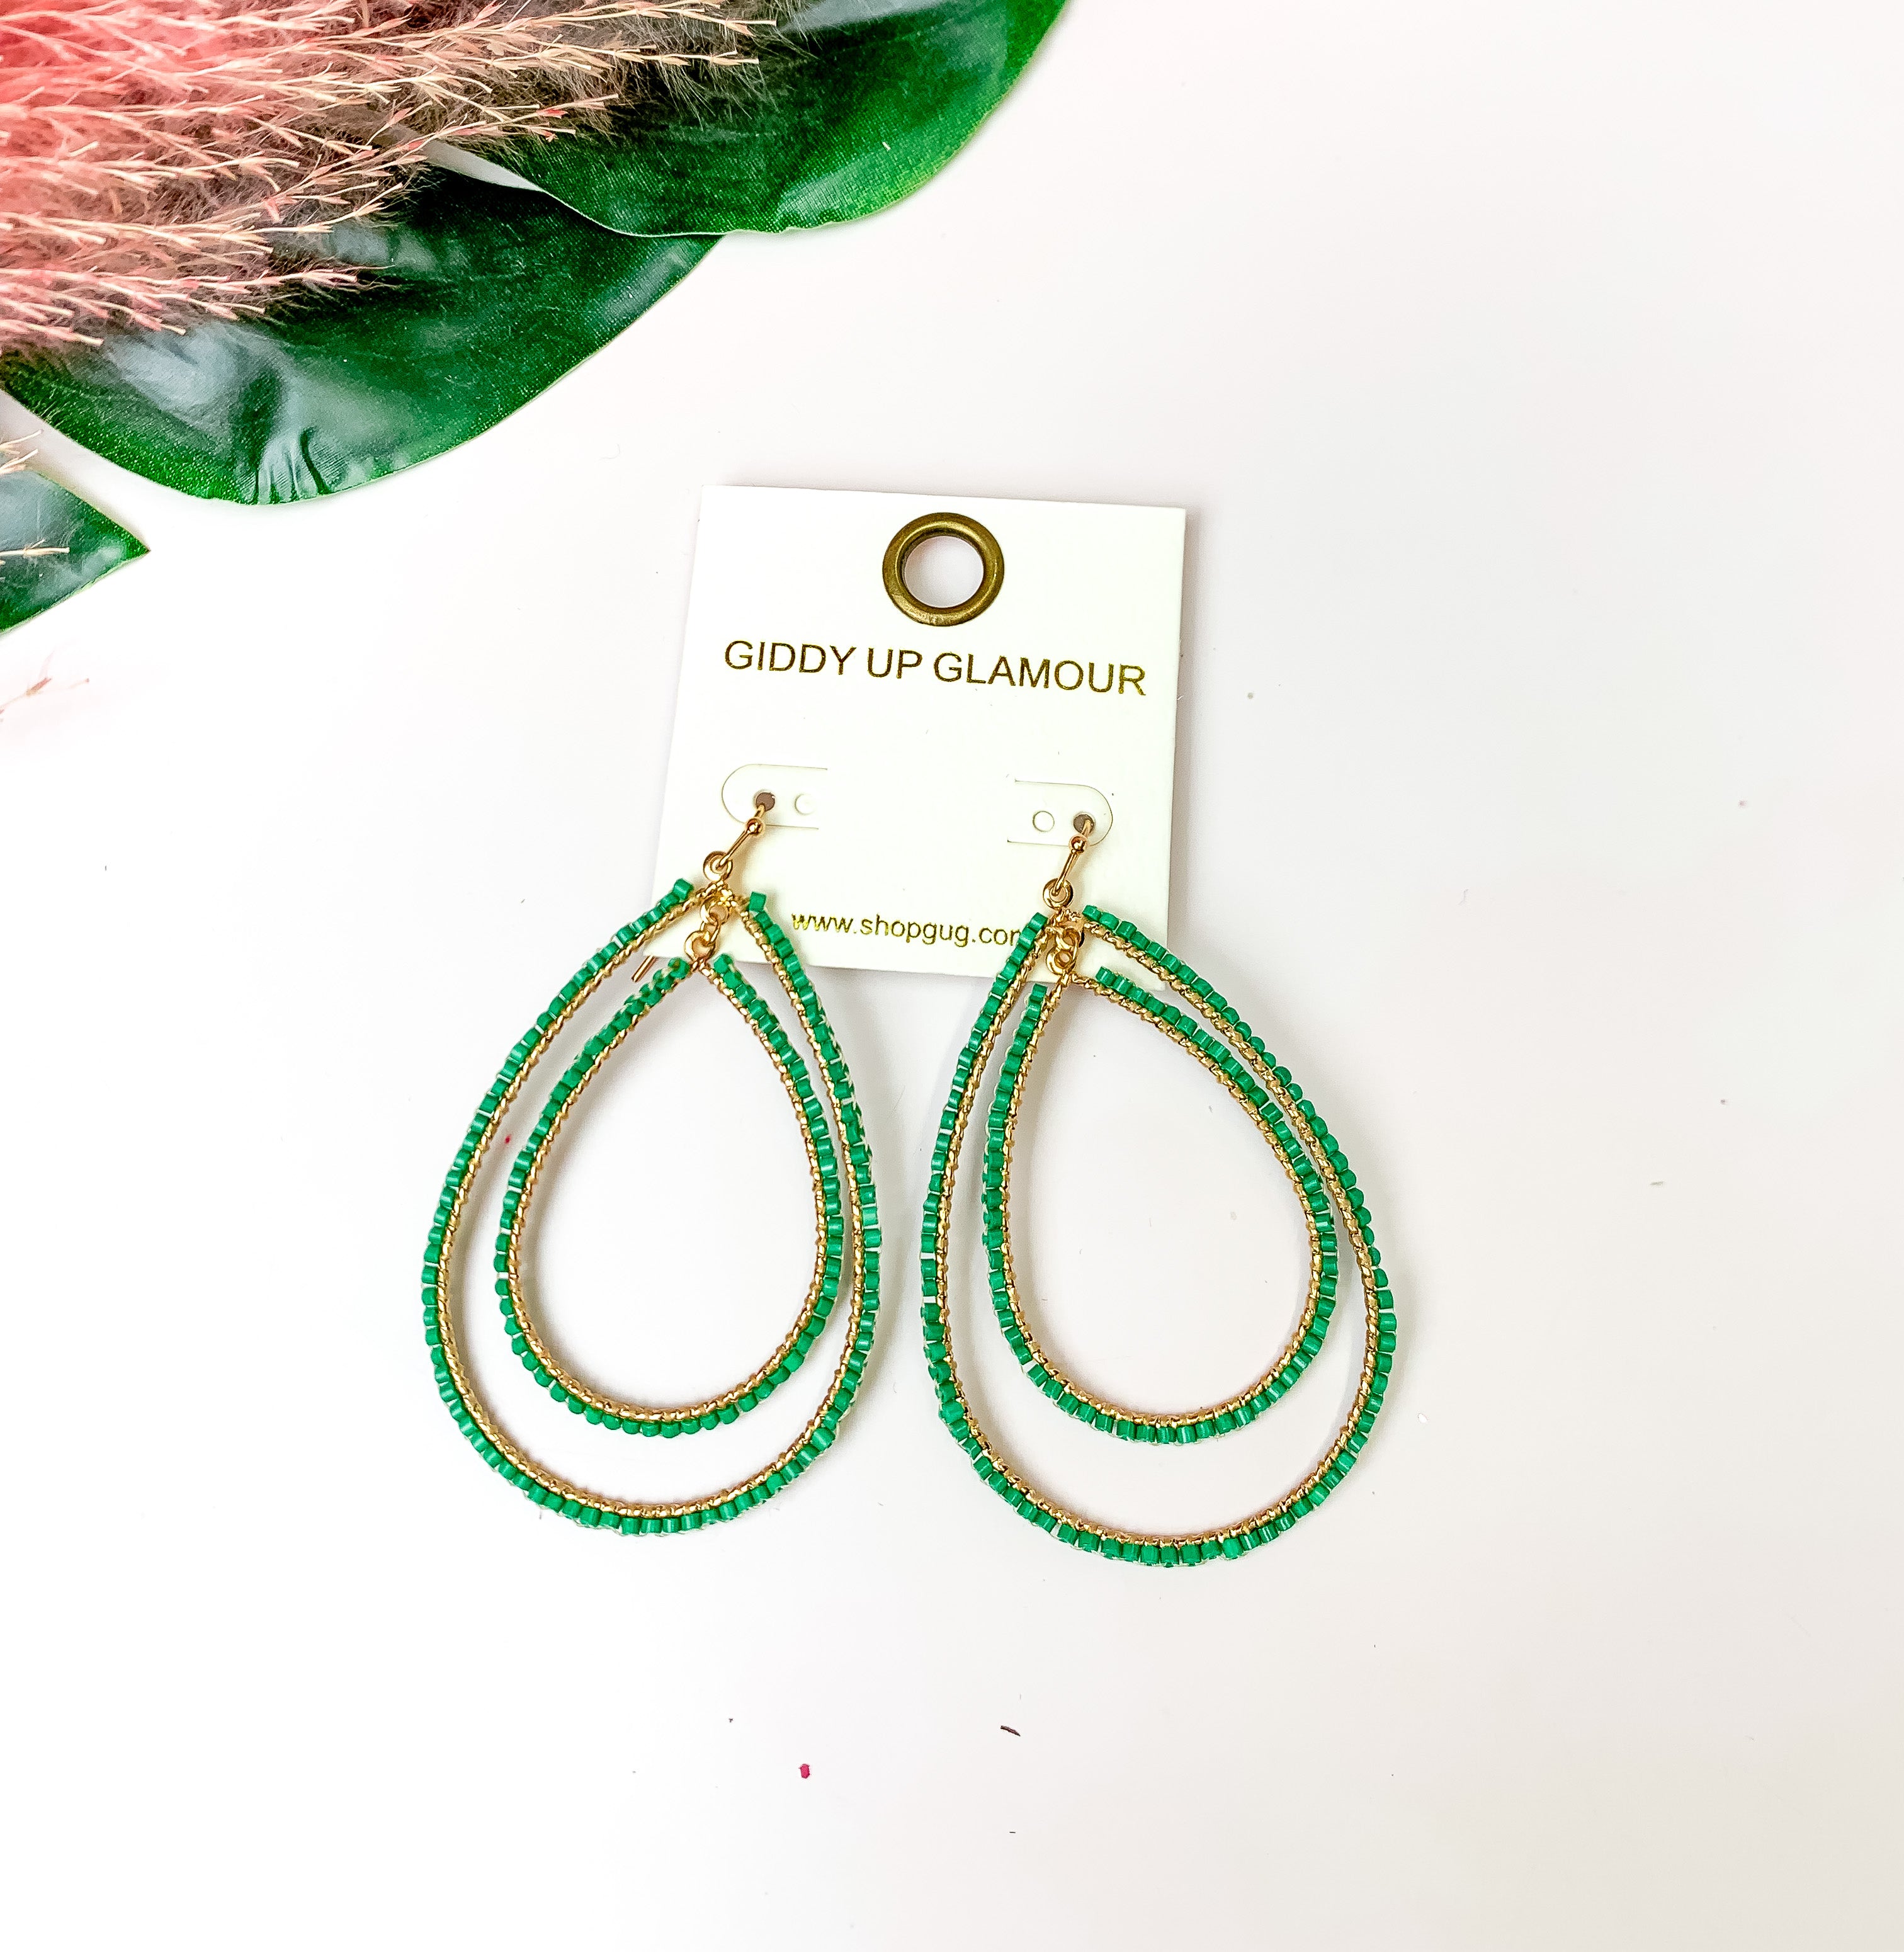 Double Open Teardrop Gold Tone Earrings with Beaded Outline in Green. Pictured on a white background with leaves in the top left corner.